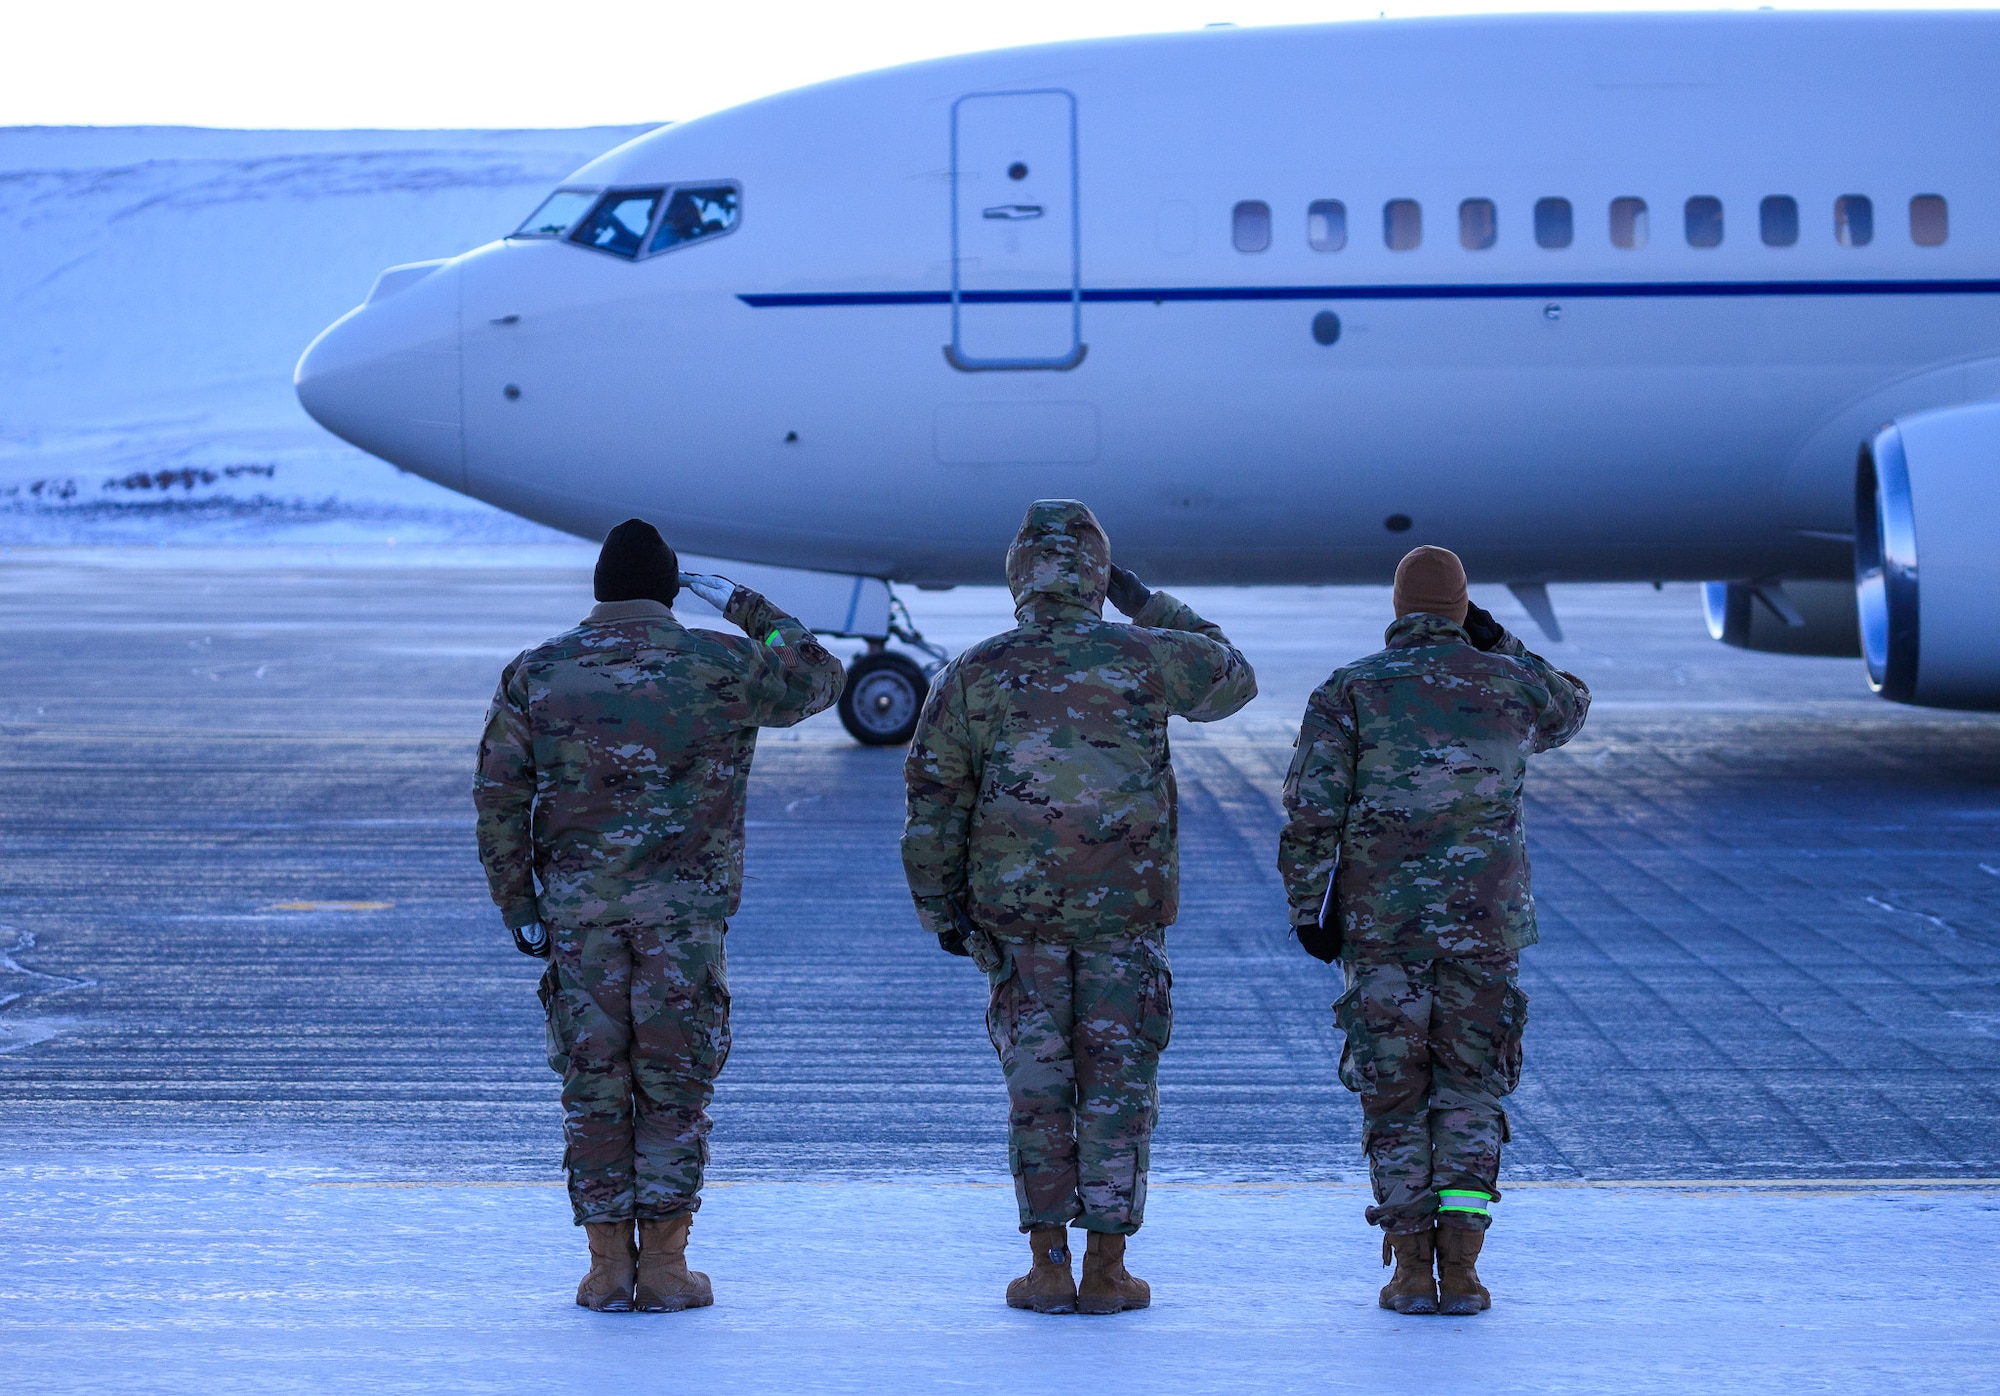 To honor the arrival of the Secretary of the Air Force’s first visit to Thule Air Base, Greenland, the 821st Air Base Group leadership render salutes as the aircraft comes to position at the passenger terminal, Feb. 11, 2022.